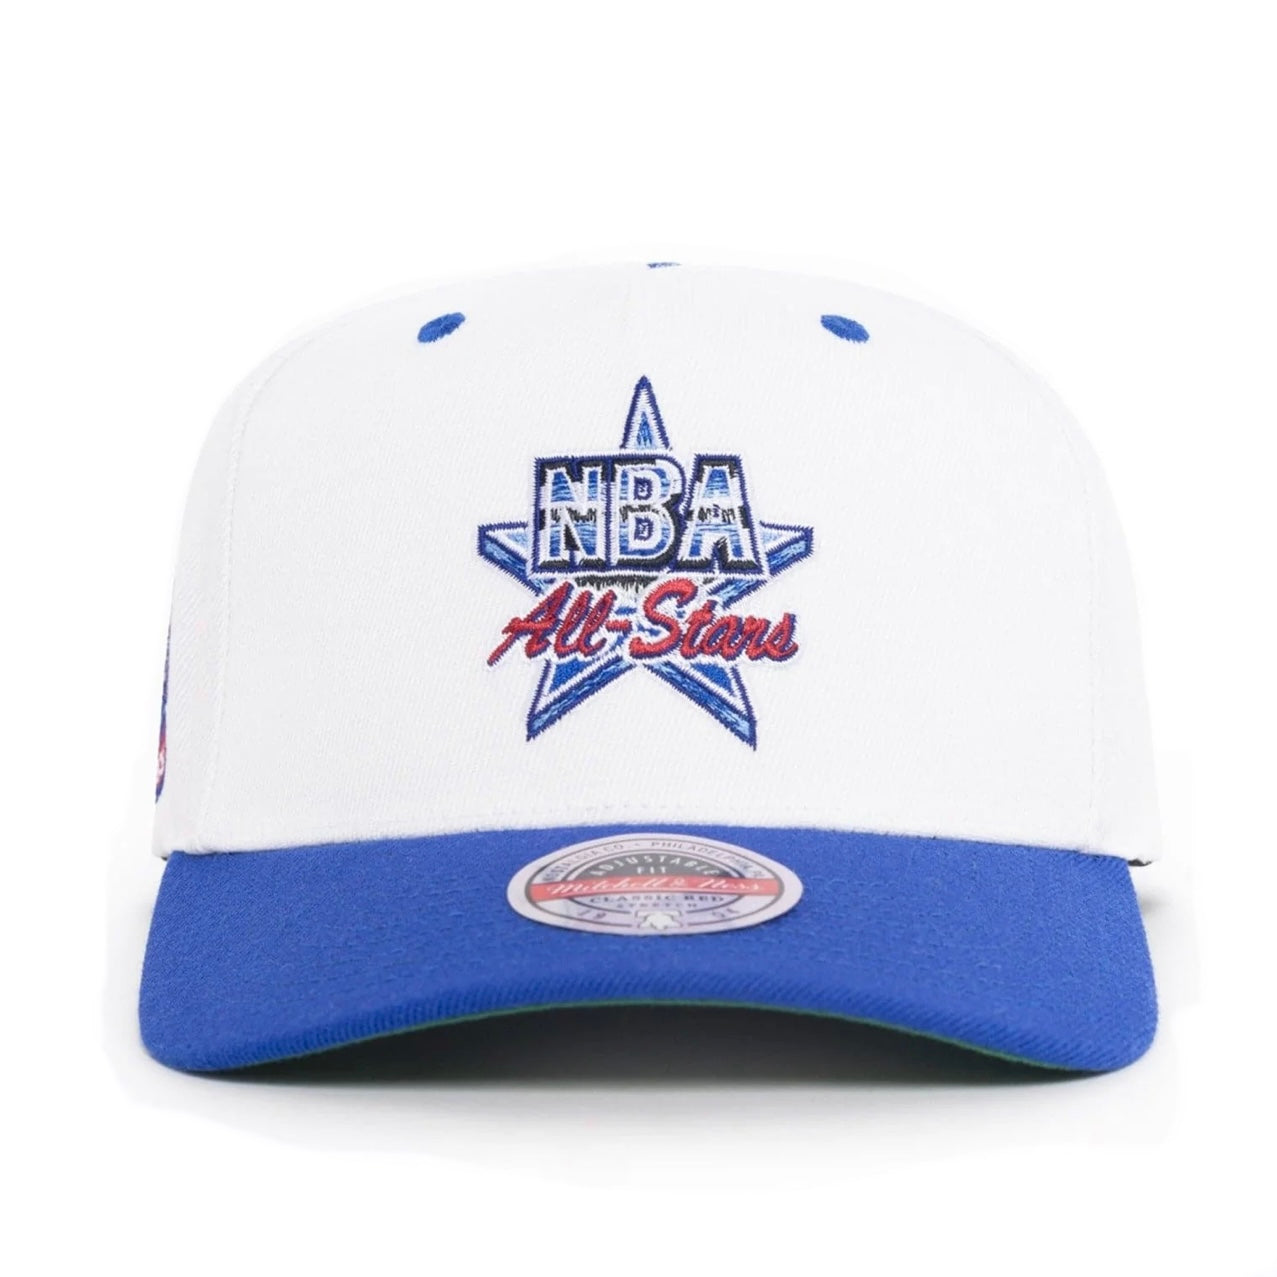 NBA All Stars 1993 Hat - Off White & Navy Classic Red Snapback Cap- Mitchell & Ness